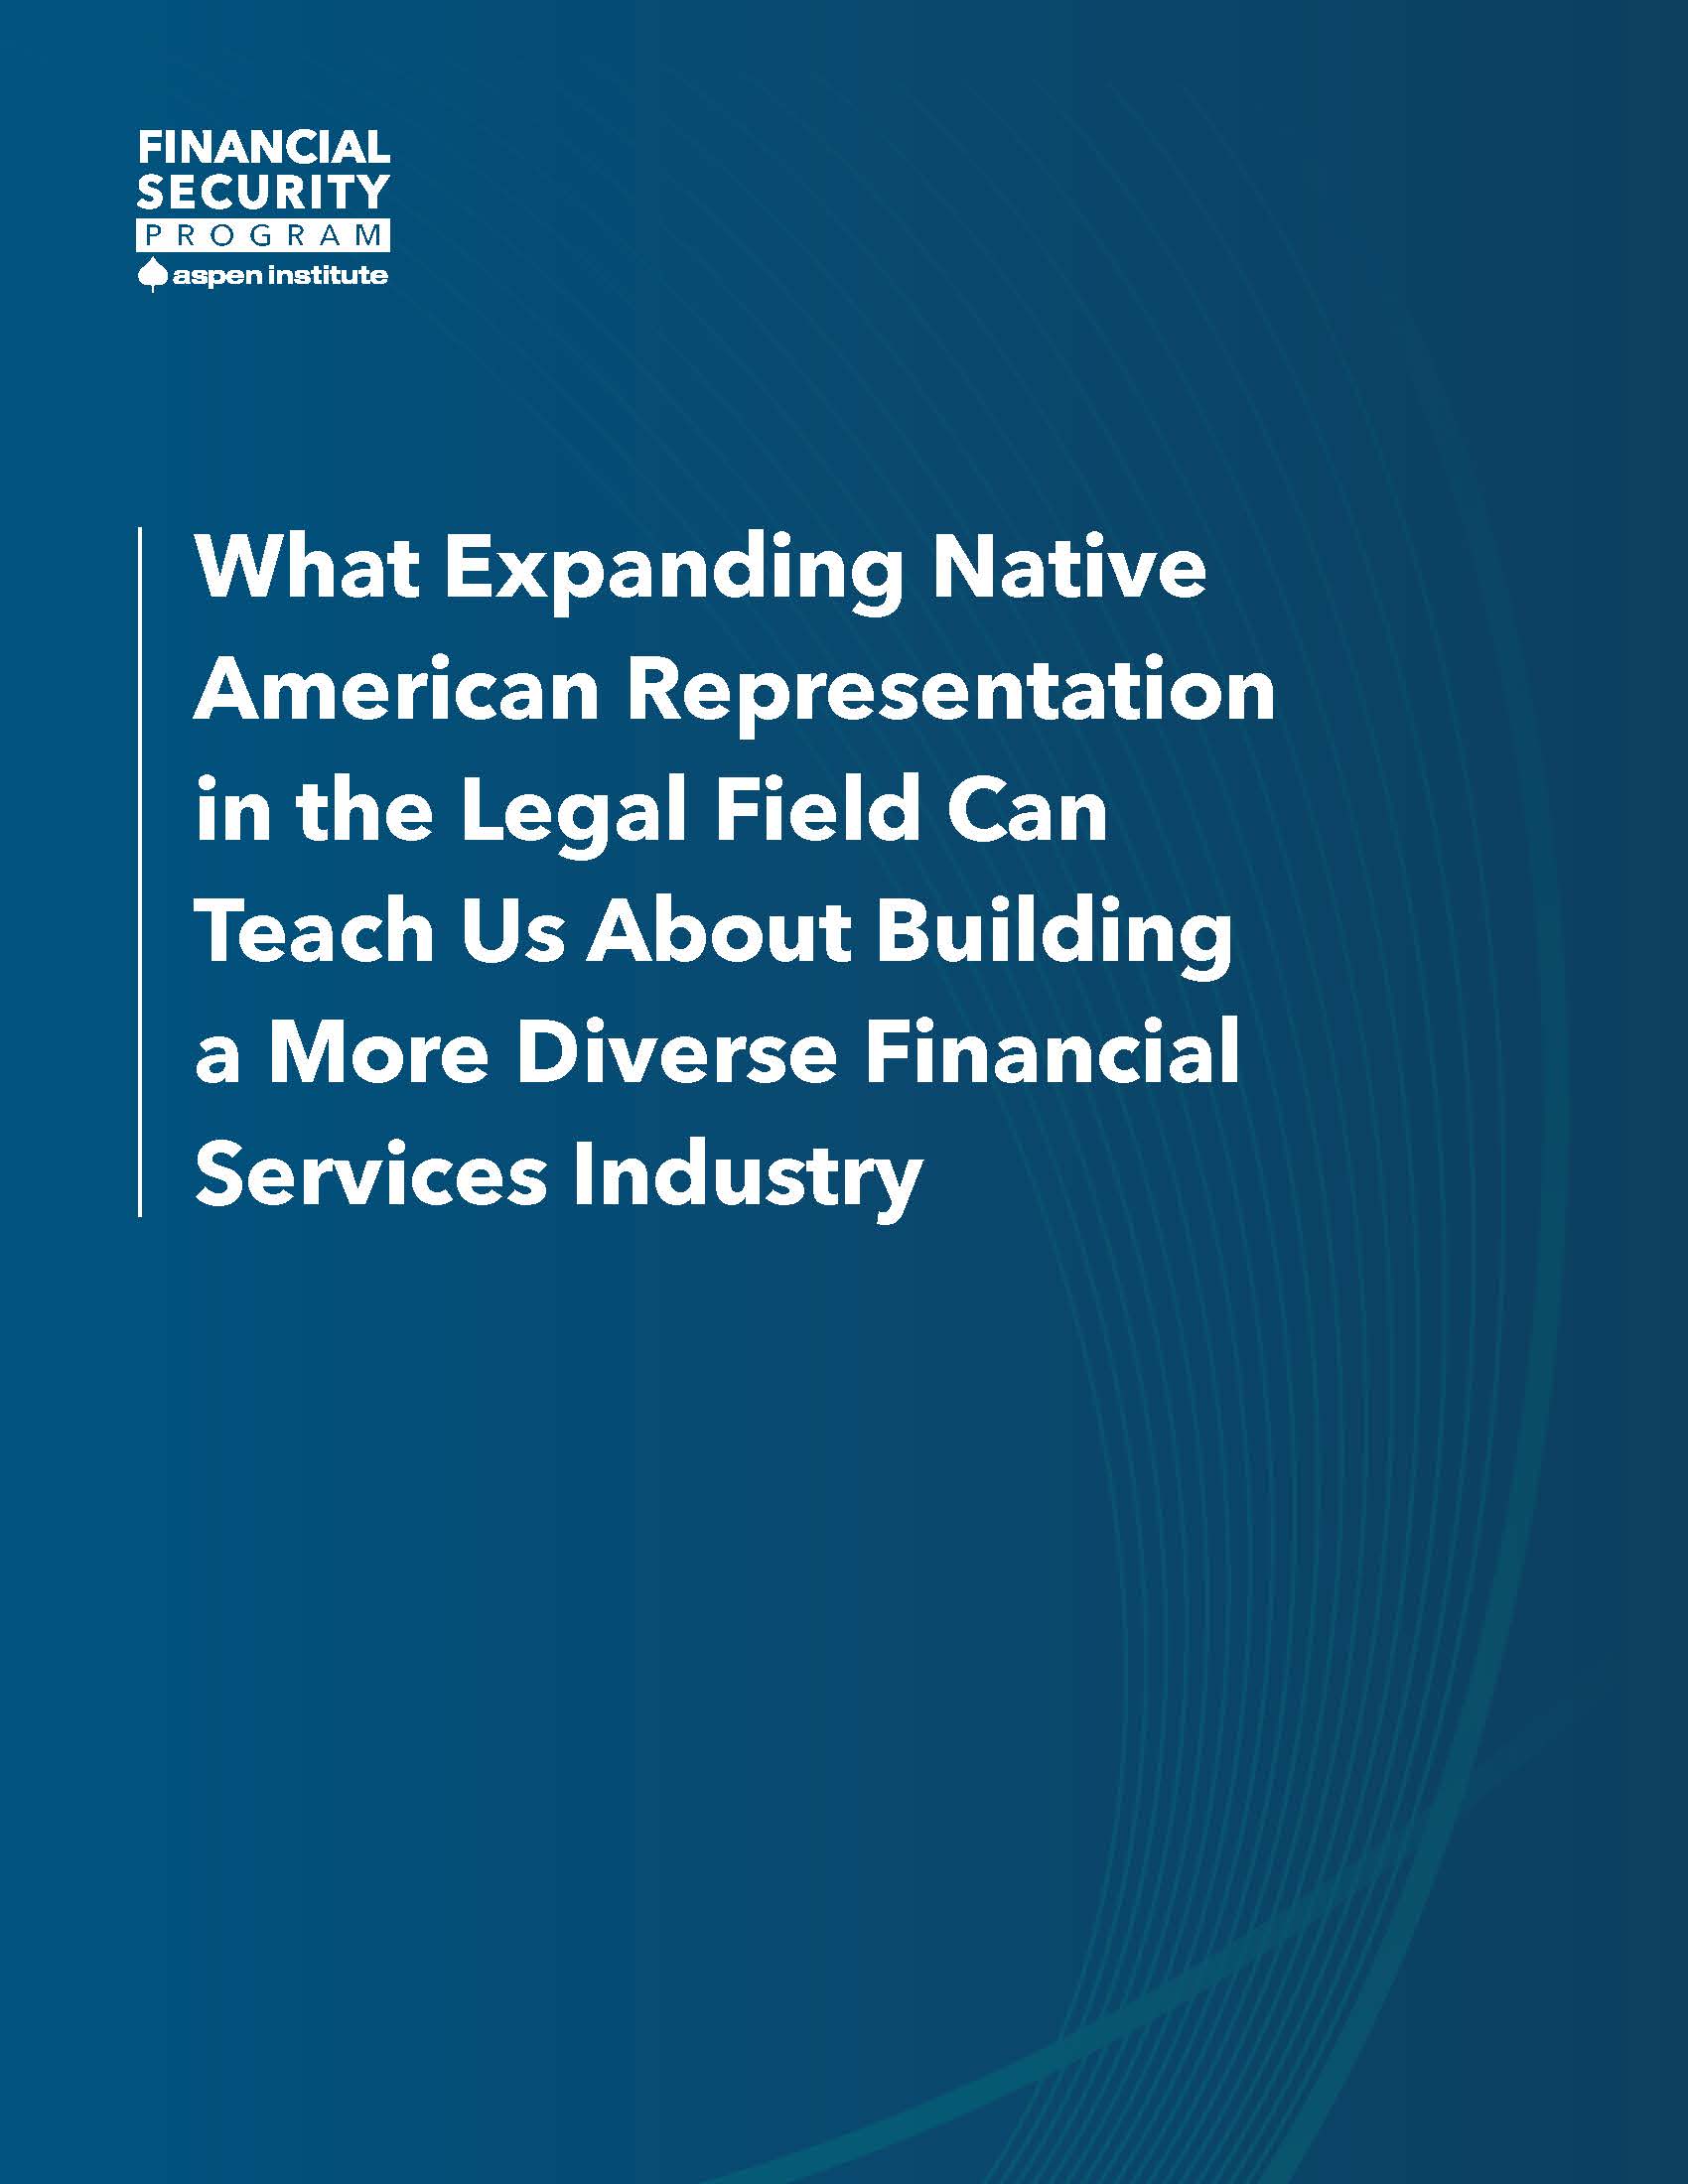 Blue cover with title "What Expanding Native American Representation in the Legal Field Can Teach Us About Building a More Diverse Financial Services Industry"